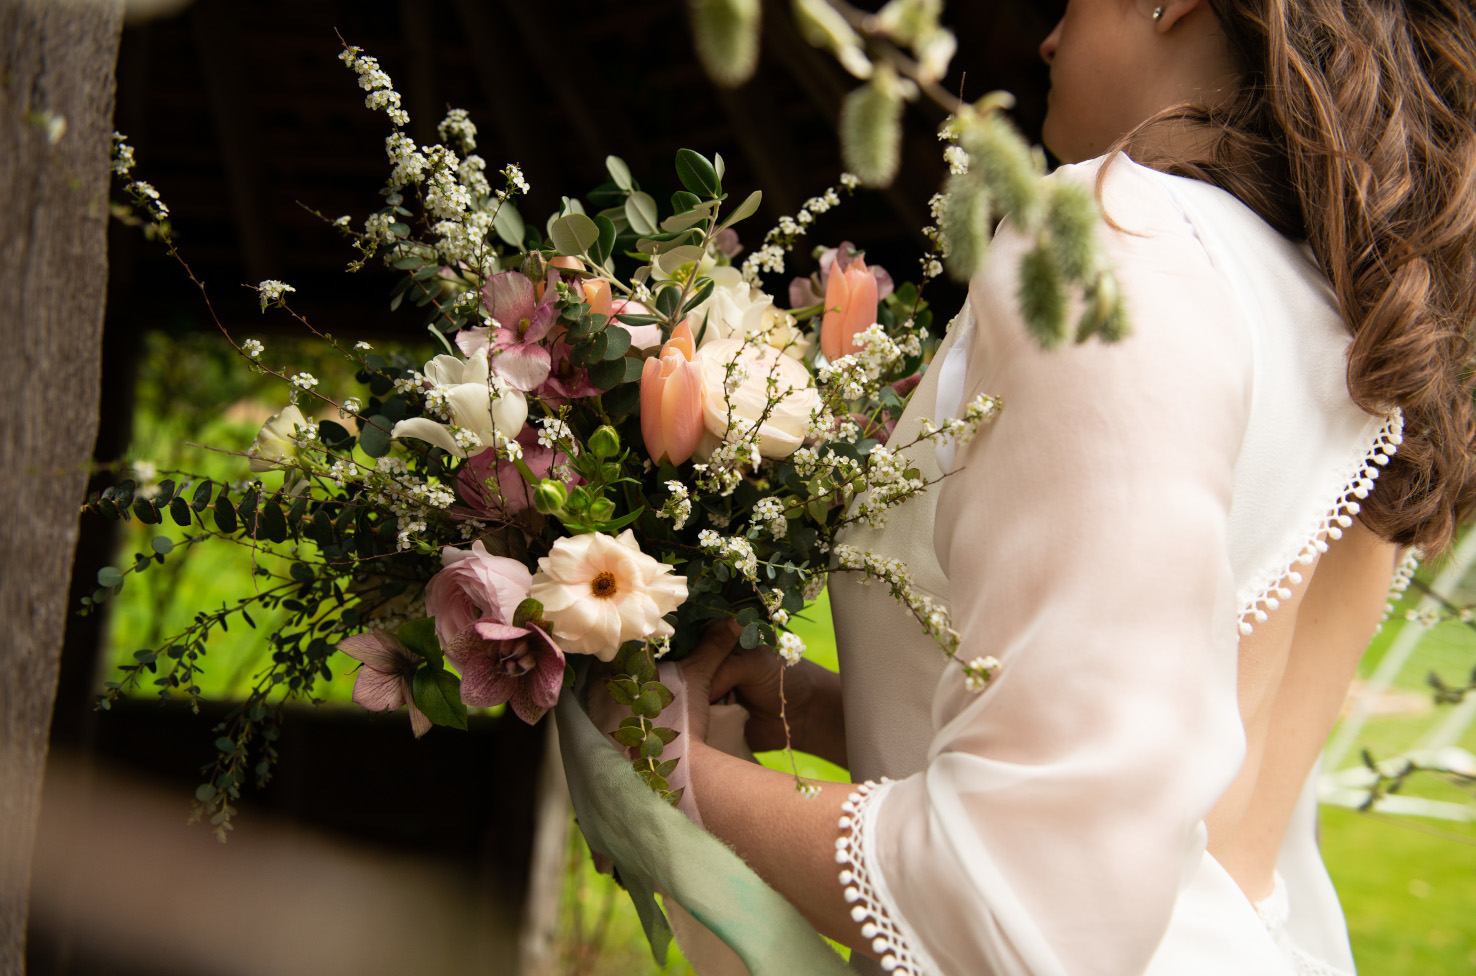 Jessica Turner designs sustainable wedding dress and flowers